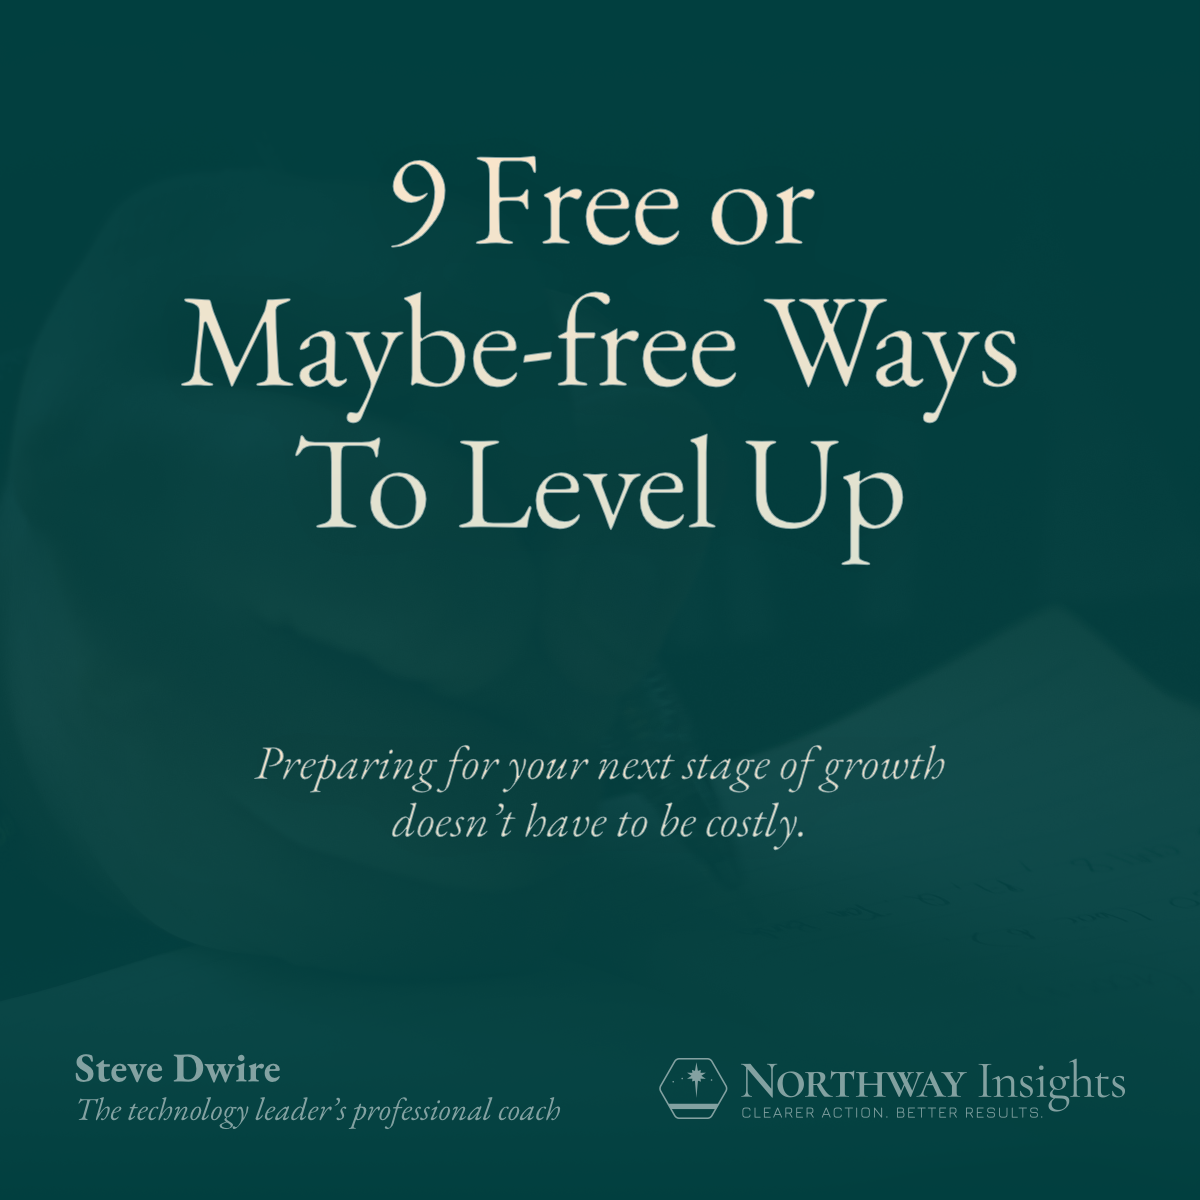 9 Free or Maybe-free Ways to Level Up (Preparing for your next stage of growth doesn't have to be costly.)